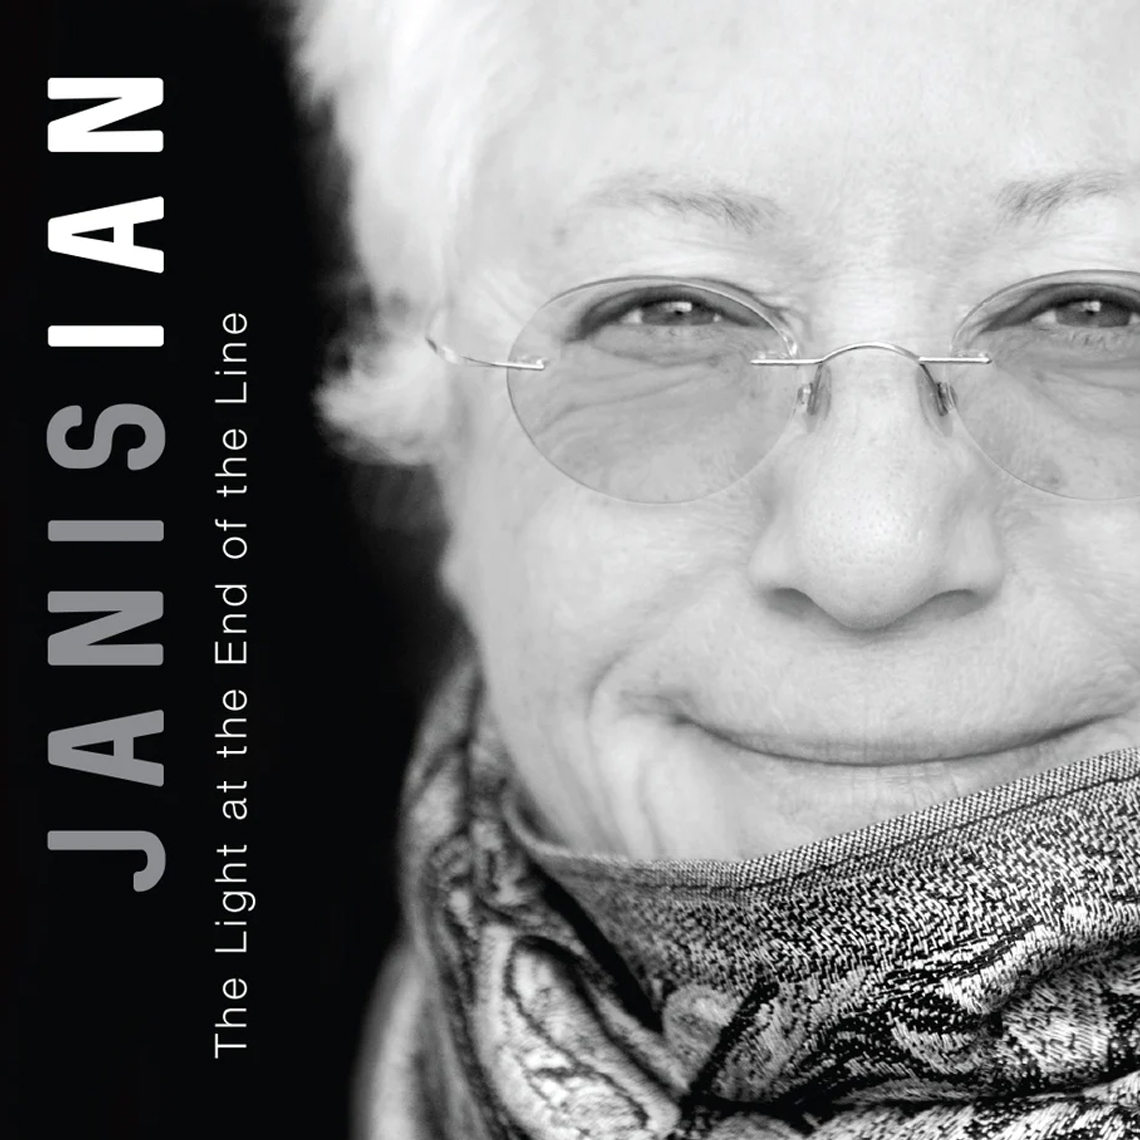 The album cover for Janis Ian's The Light at the End of the Line